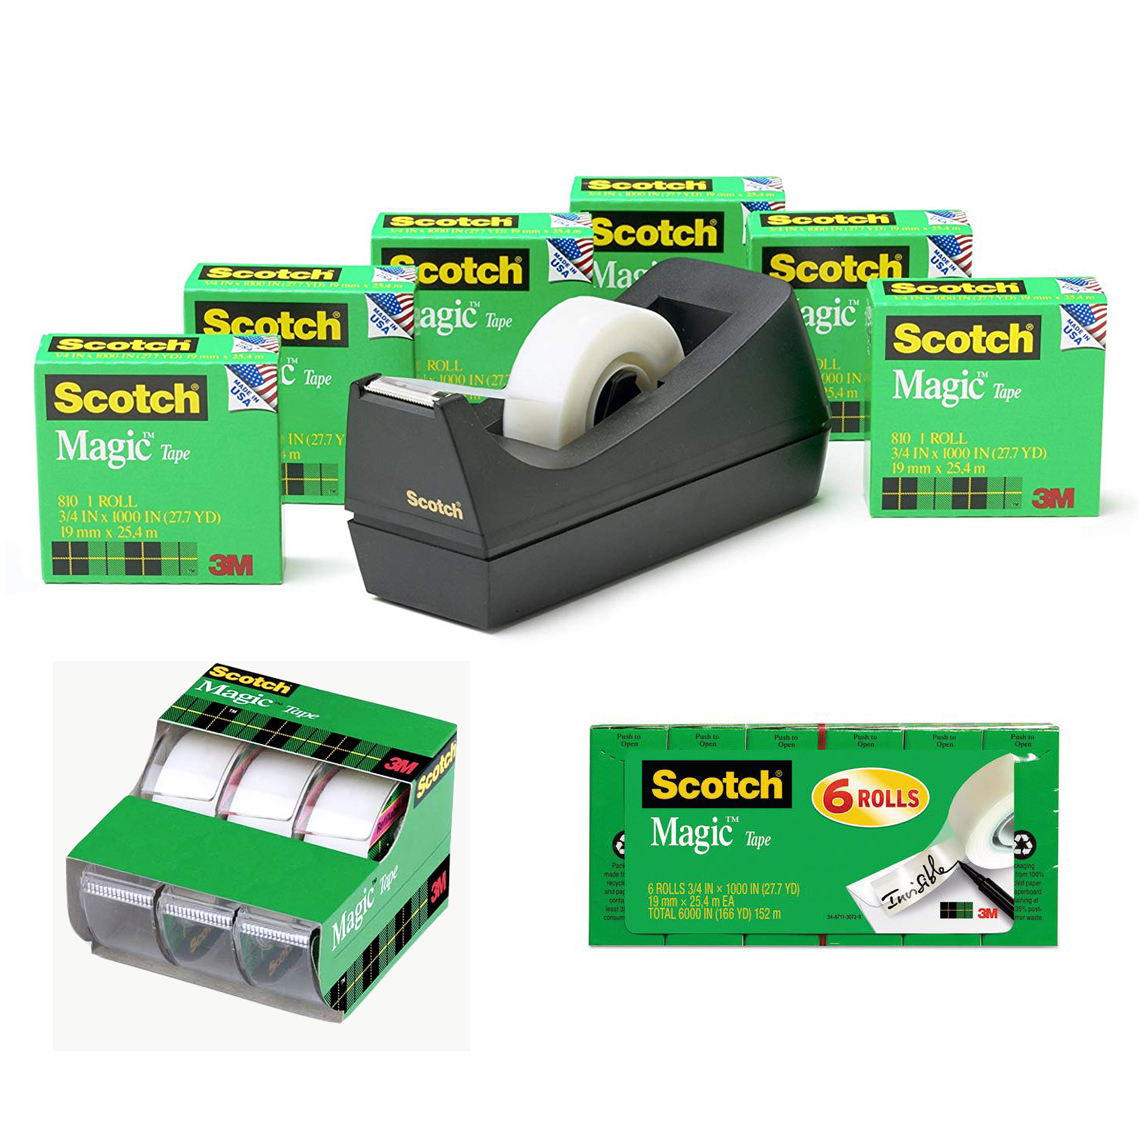 Lot of 2 Scotch MagicTape 3M12 x 2 = 24 Jumbo Rolls Invisible Clear 3/4 x1500 In 